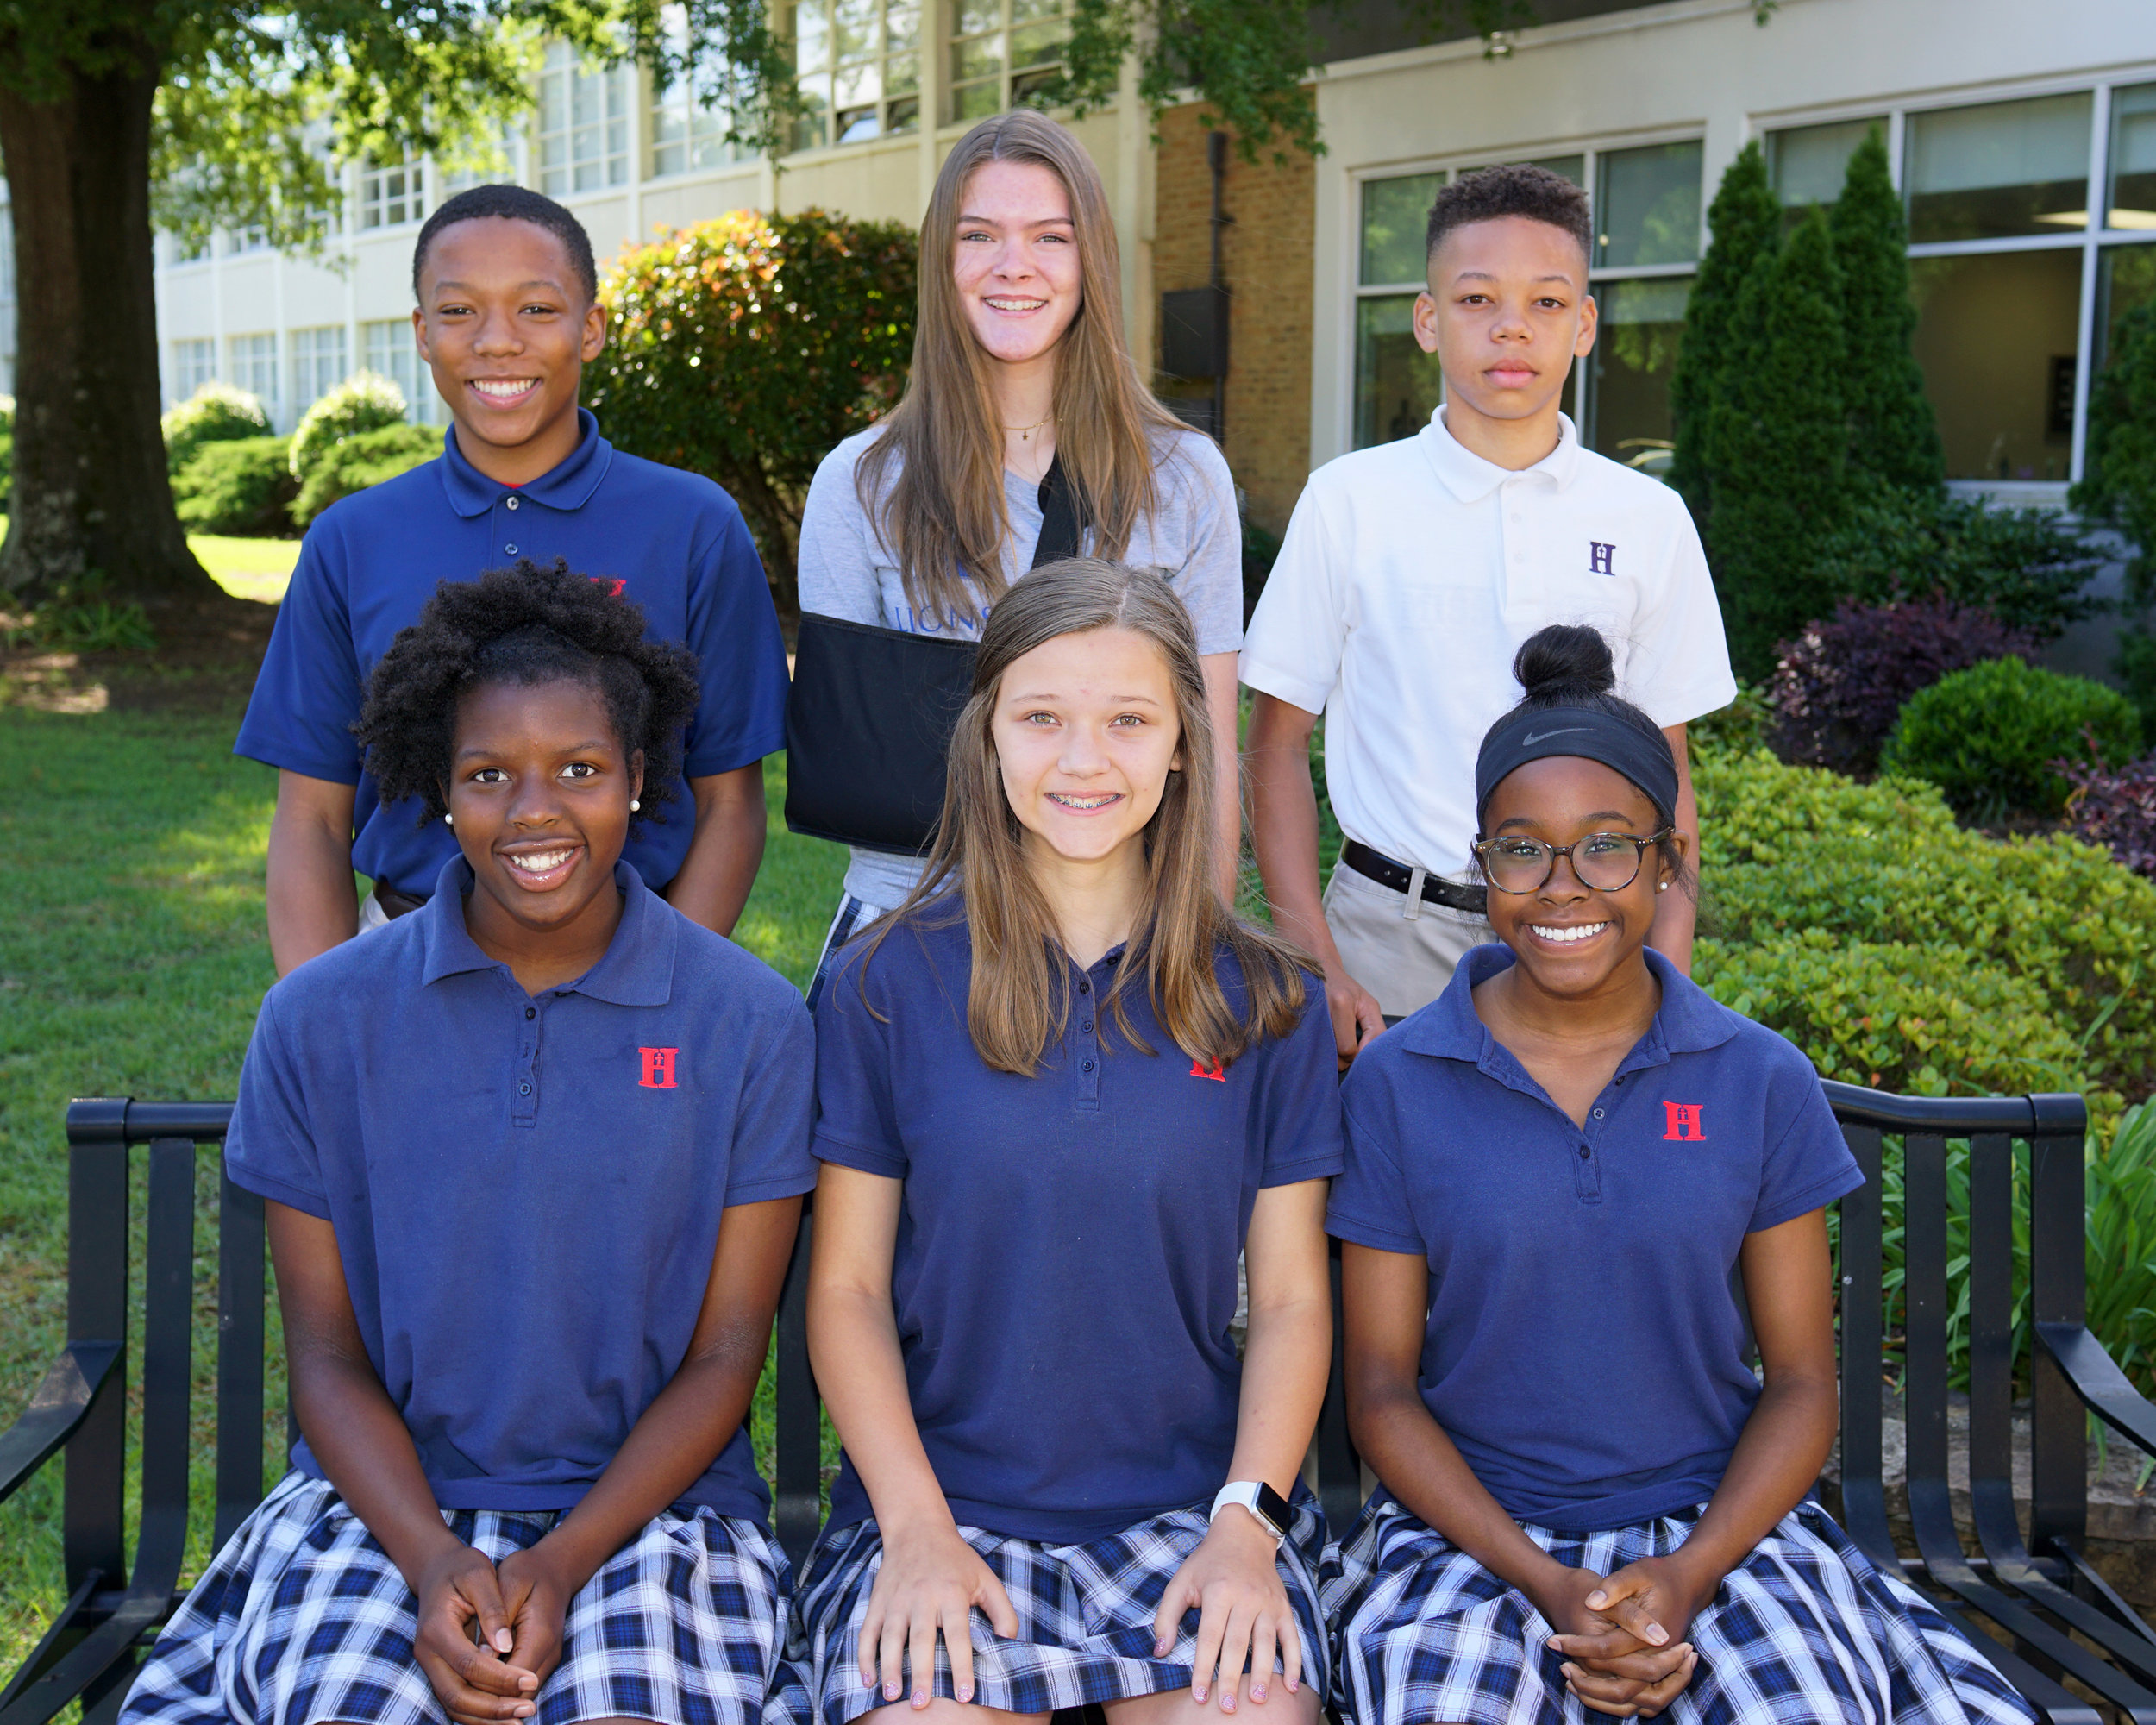 Back row (l to r): Blake Oswell, Madie Liberto, RJ Freeman  Front row (l to r): Makyah Thomas, Chandler Donlin, Shelby Williams